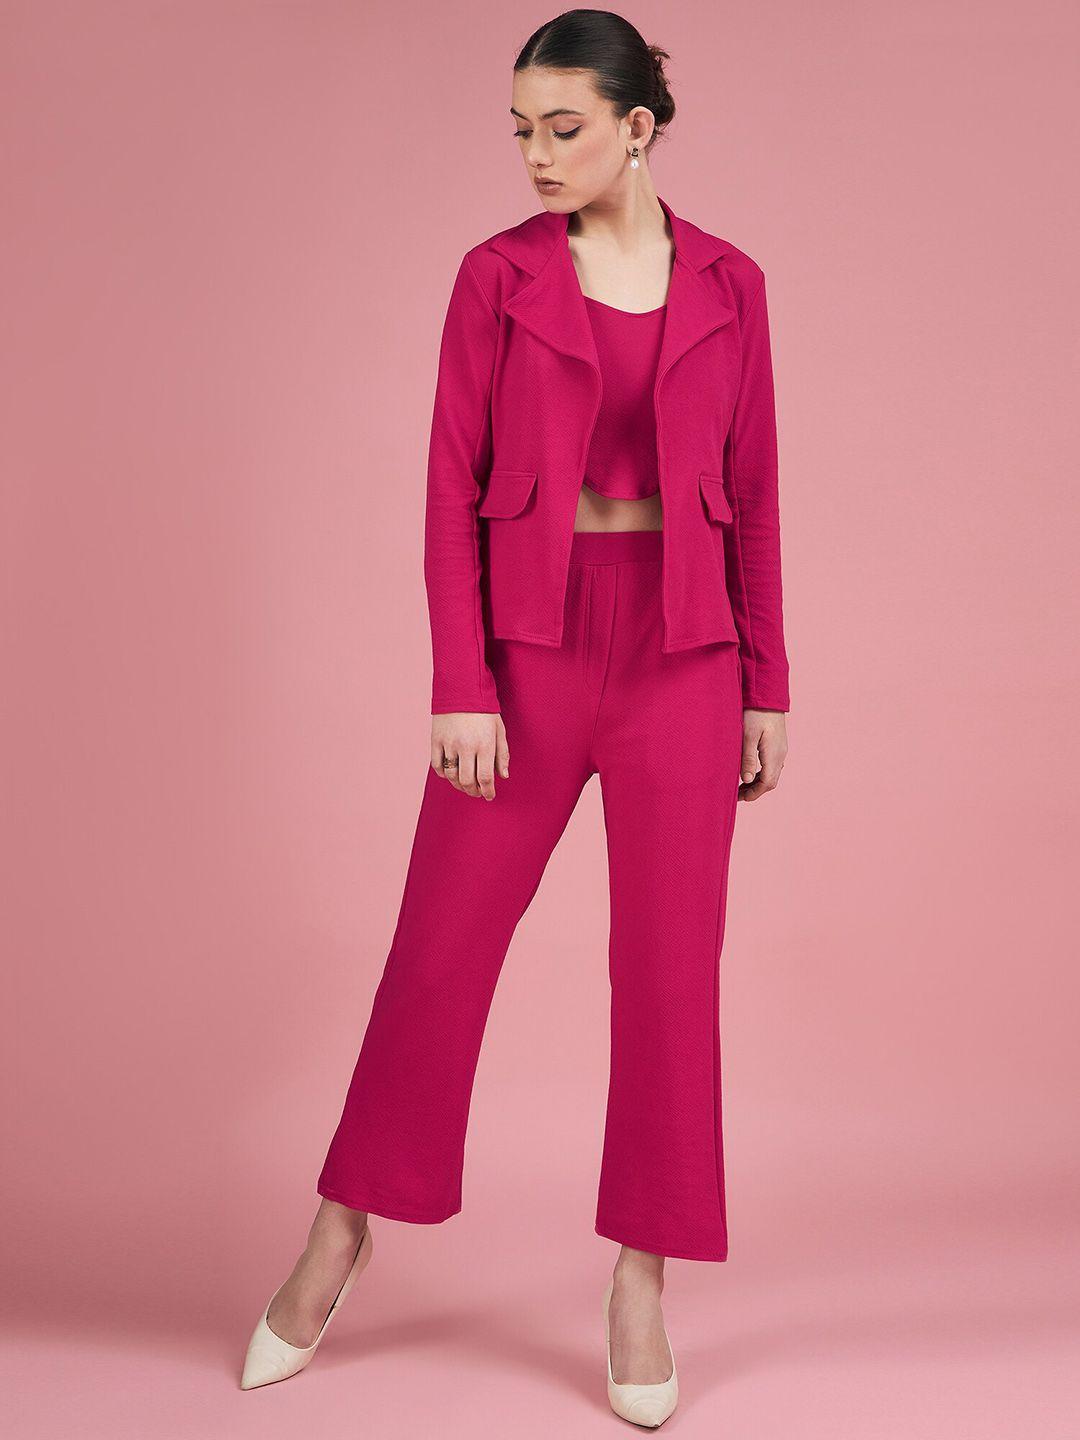 dressberry shoulder straps top & blazer with trousers